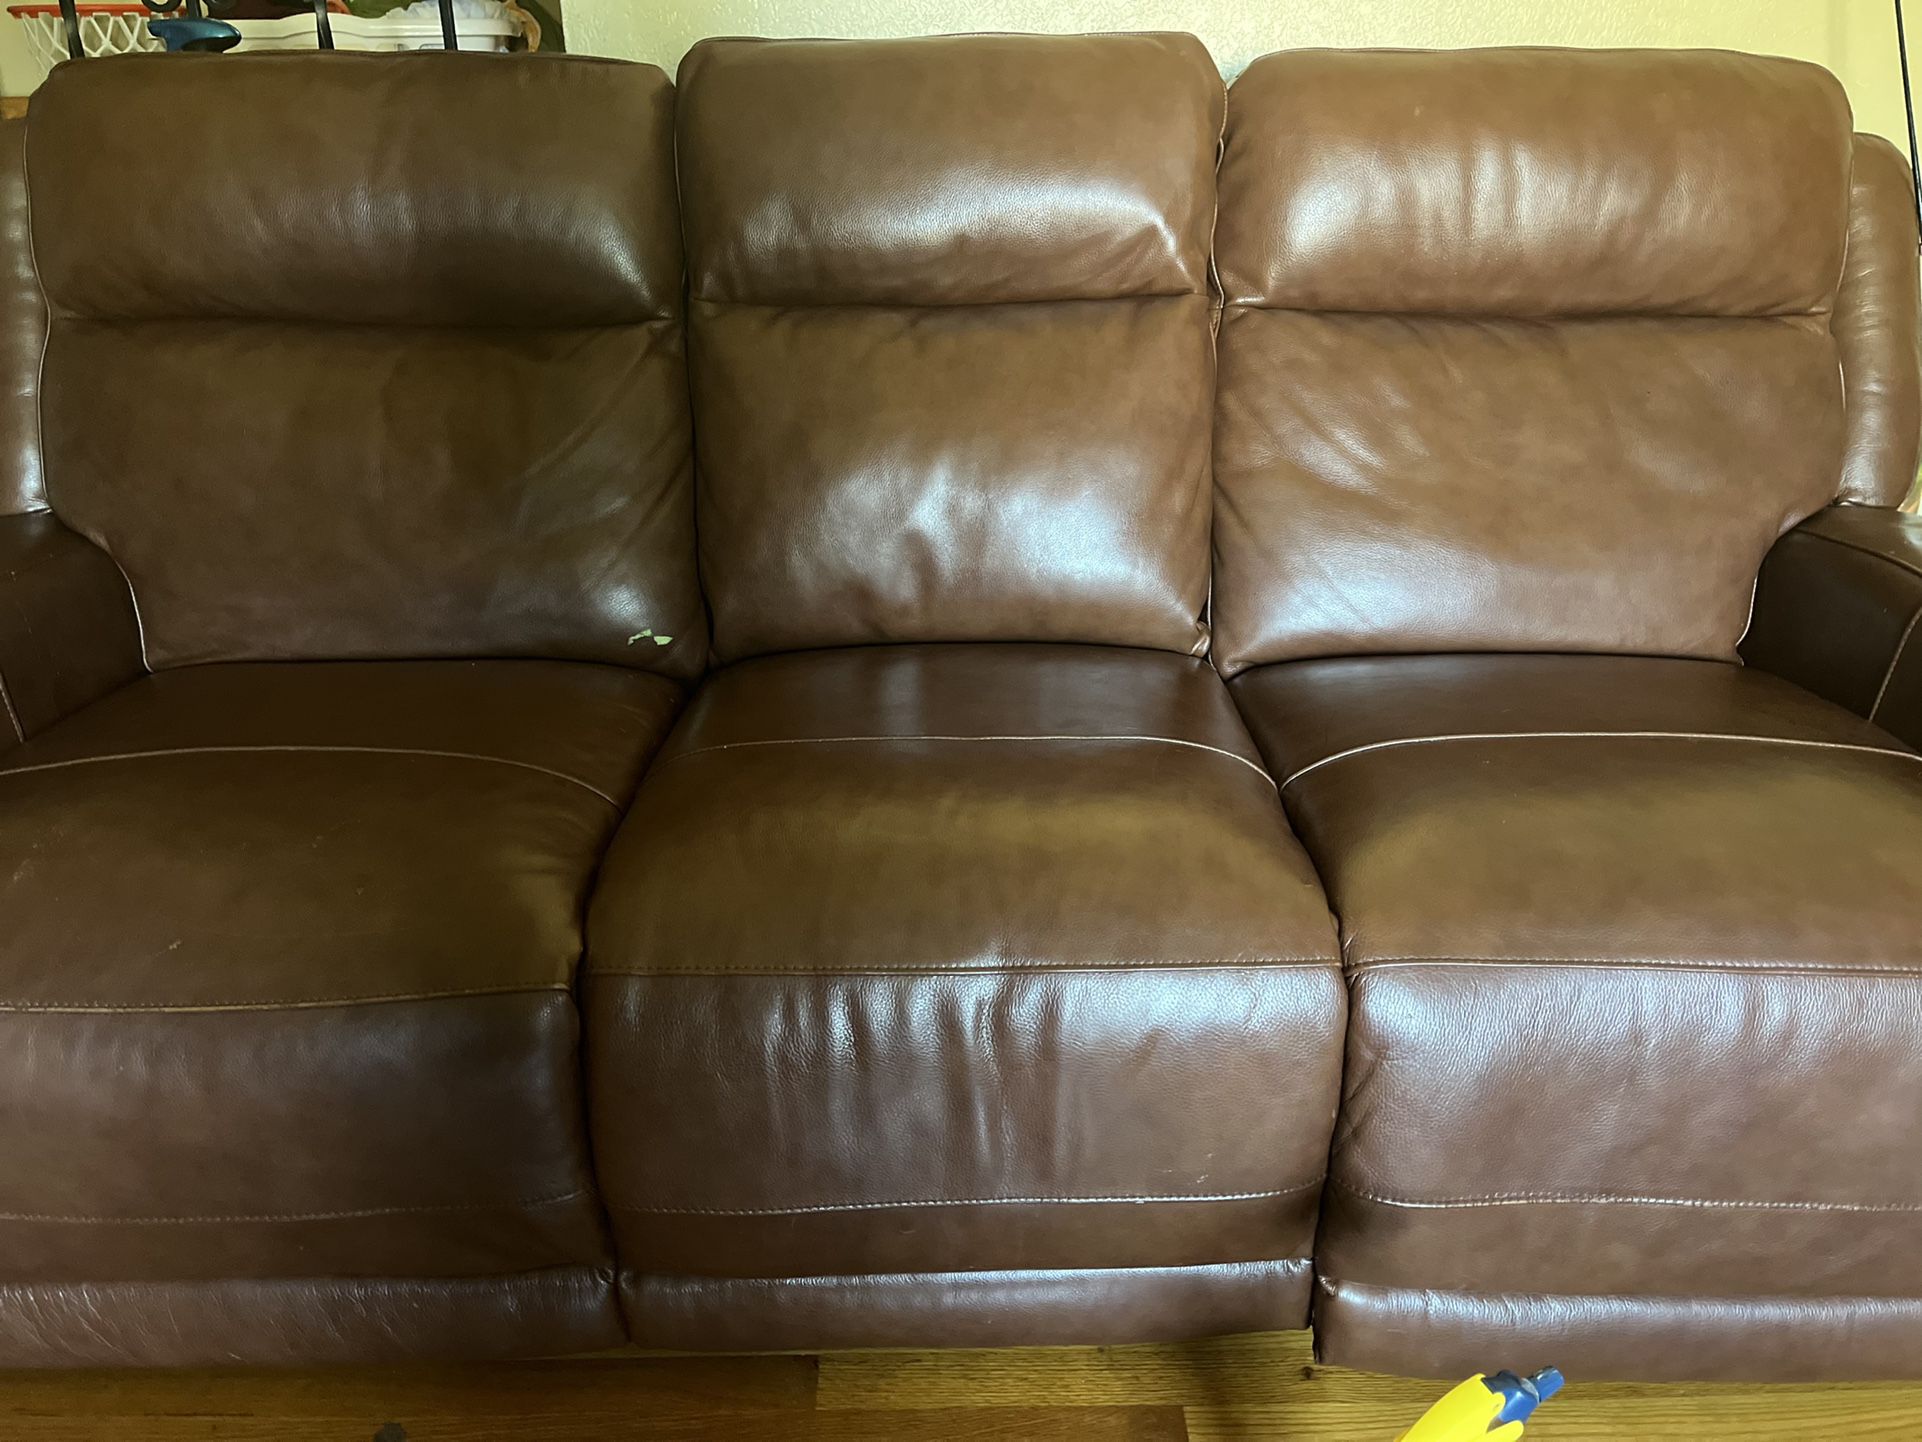 We Have A Full Set Leather Electric Couch Great Condition No Rip Or /Tears Plugs On Sides